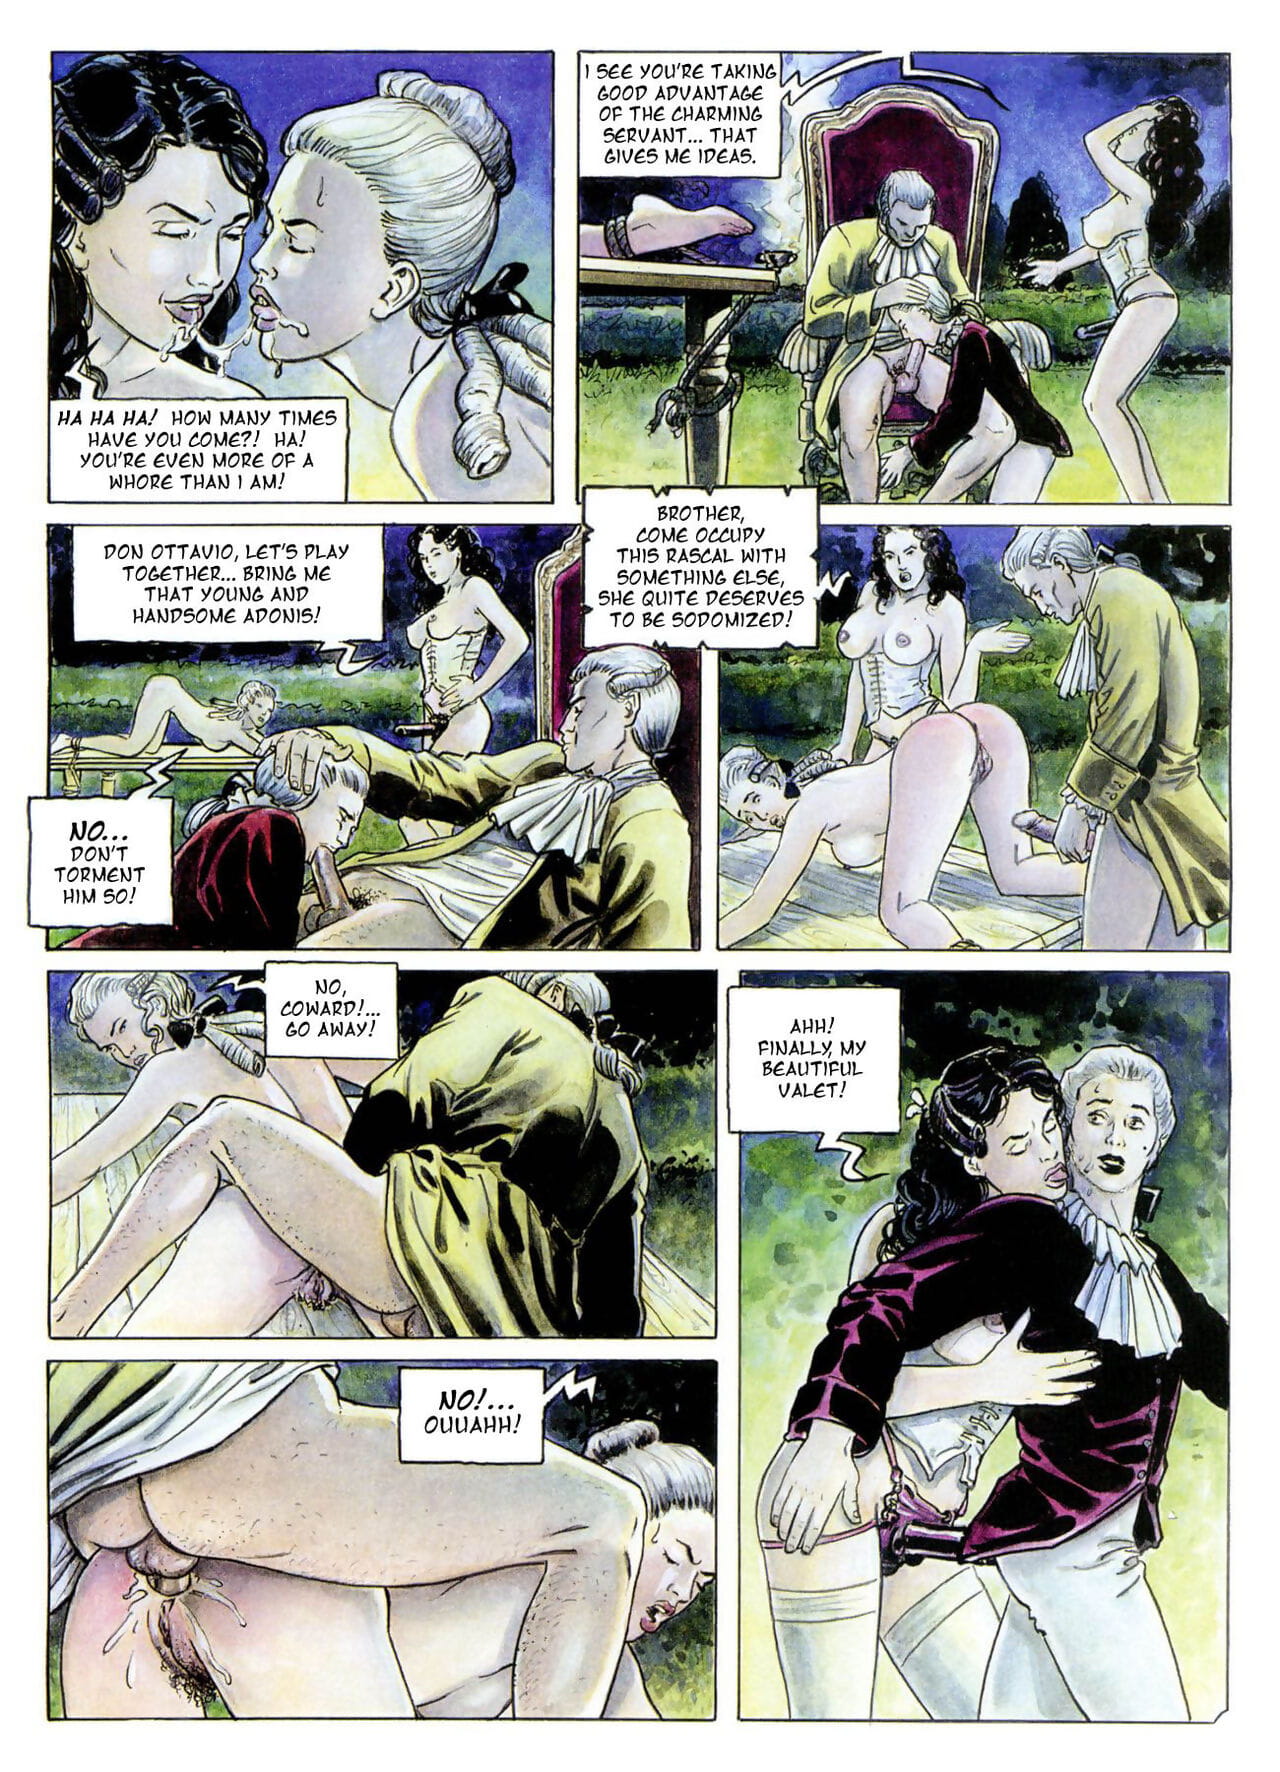 Don Giovanni - part 2 page 1